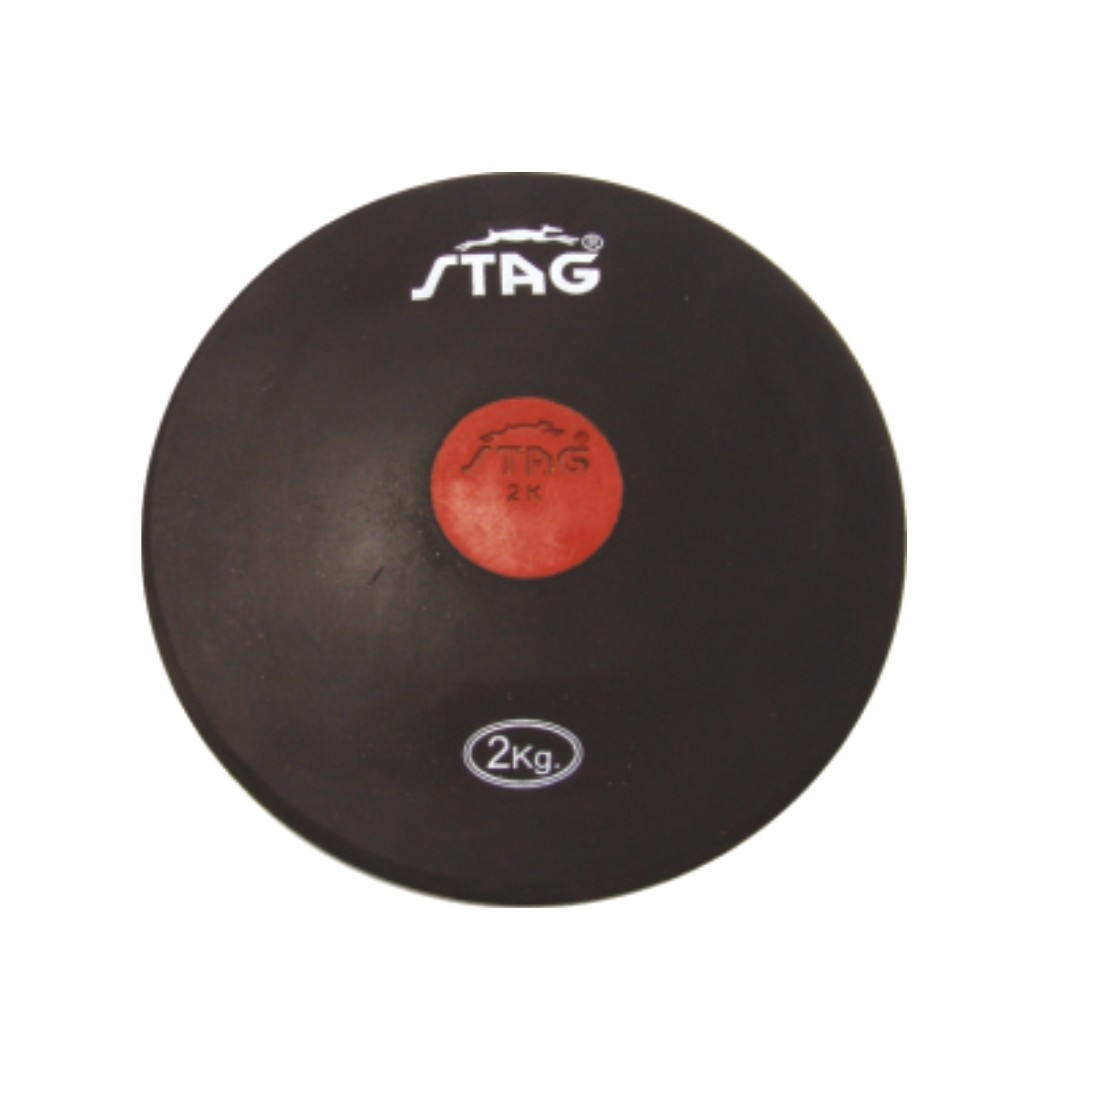 STAG DISCUS BLACK SYNTHETIC RUBBER 2.5 KG